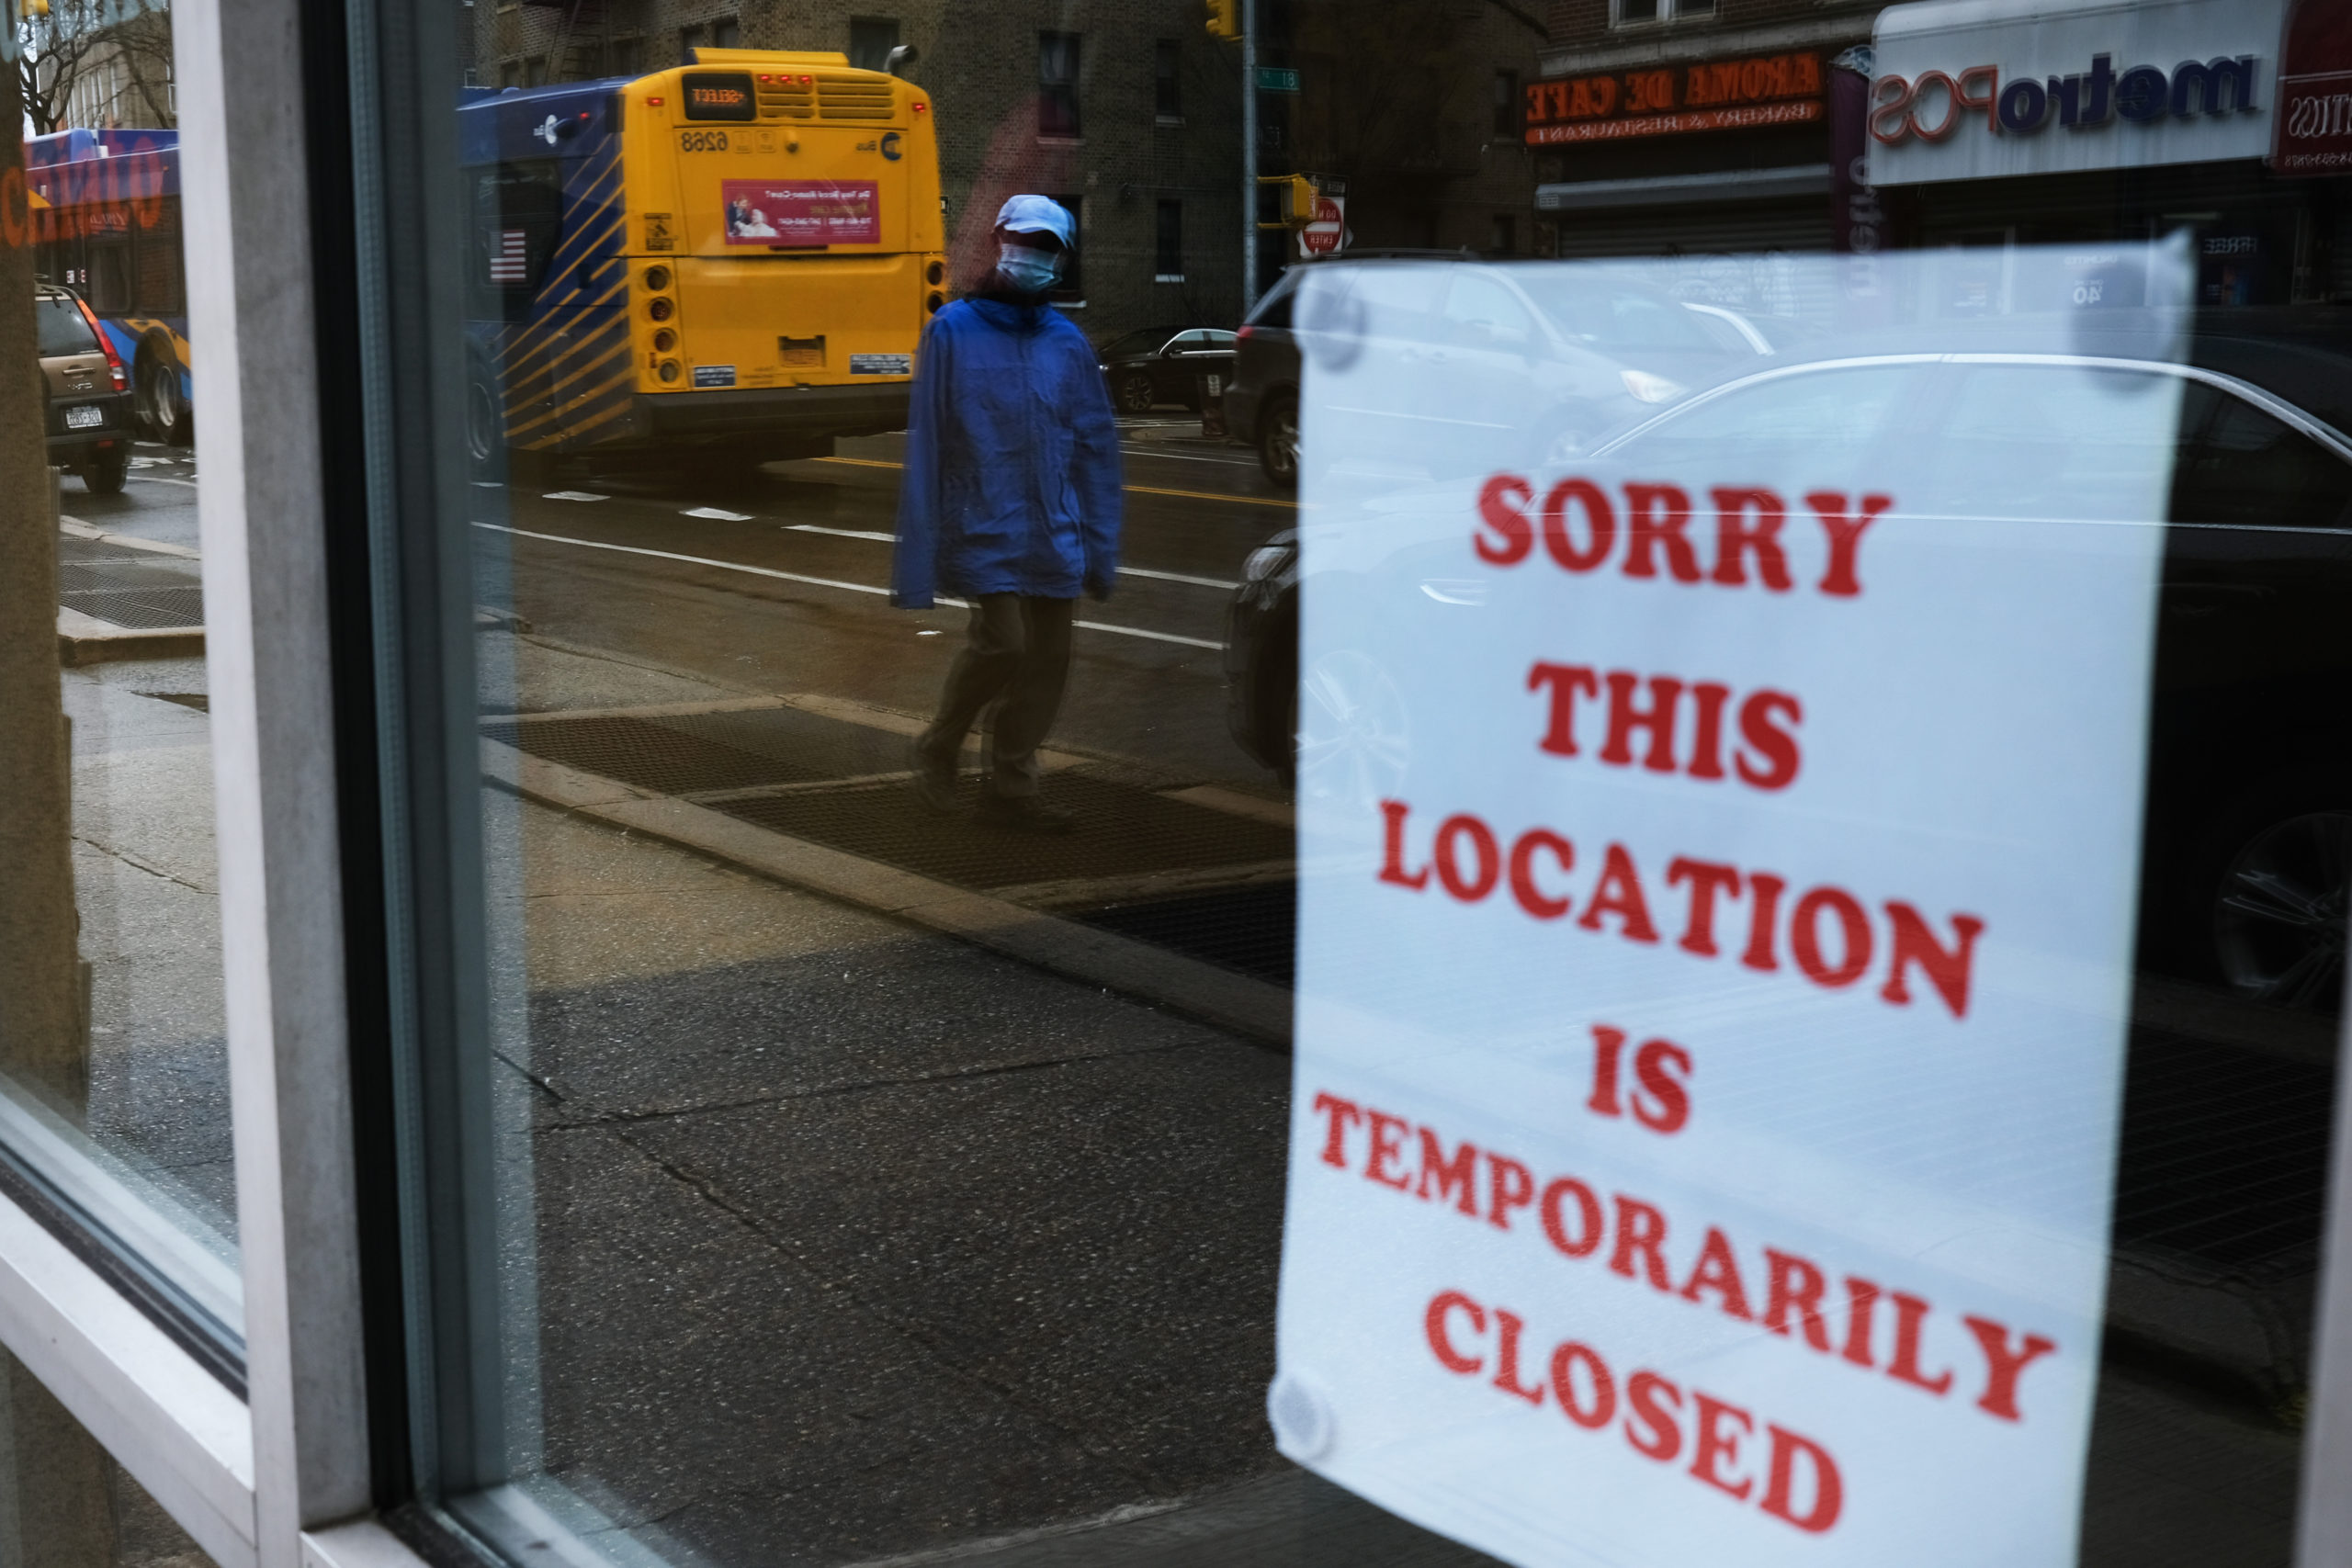 A sign alerts customers that a business in Queens, which has one of the highest infection rates of coronavirus in the nation, is closed on April 03, 2020 in New York City. Hospitals in New York City, the nation's current epicenter of the COVID-19 outbreak, are facing shortages of beds, ventilators and protective equipment for medical staff. Currently, over 100, 000 New Yorkers have tested positive for COVID-19. (Photo by Spencer Platt/Getty Images)